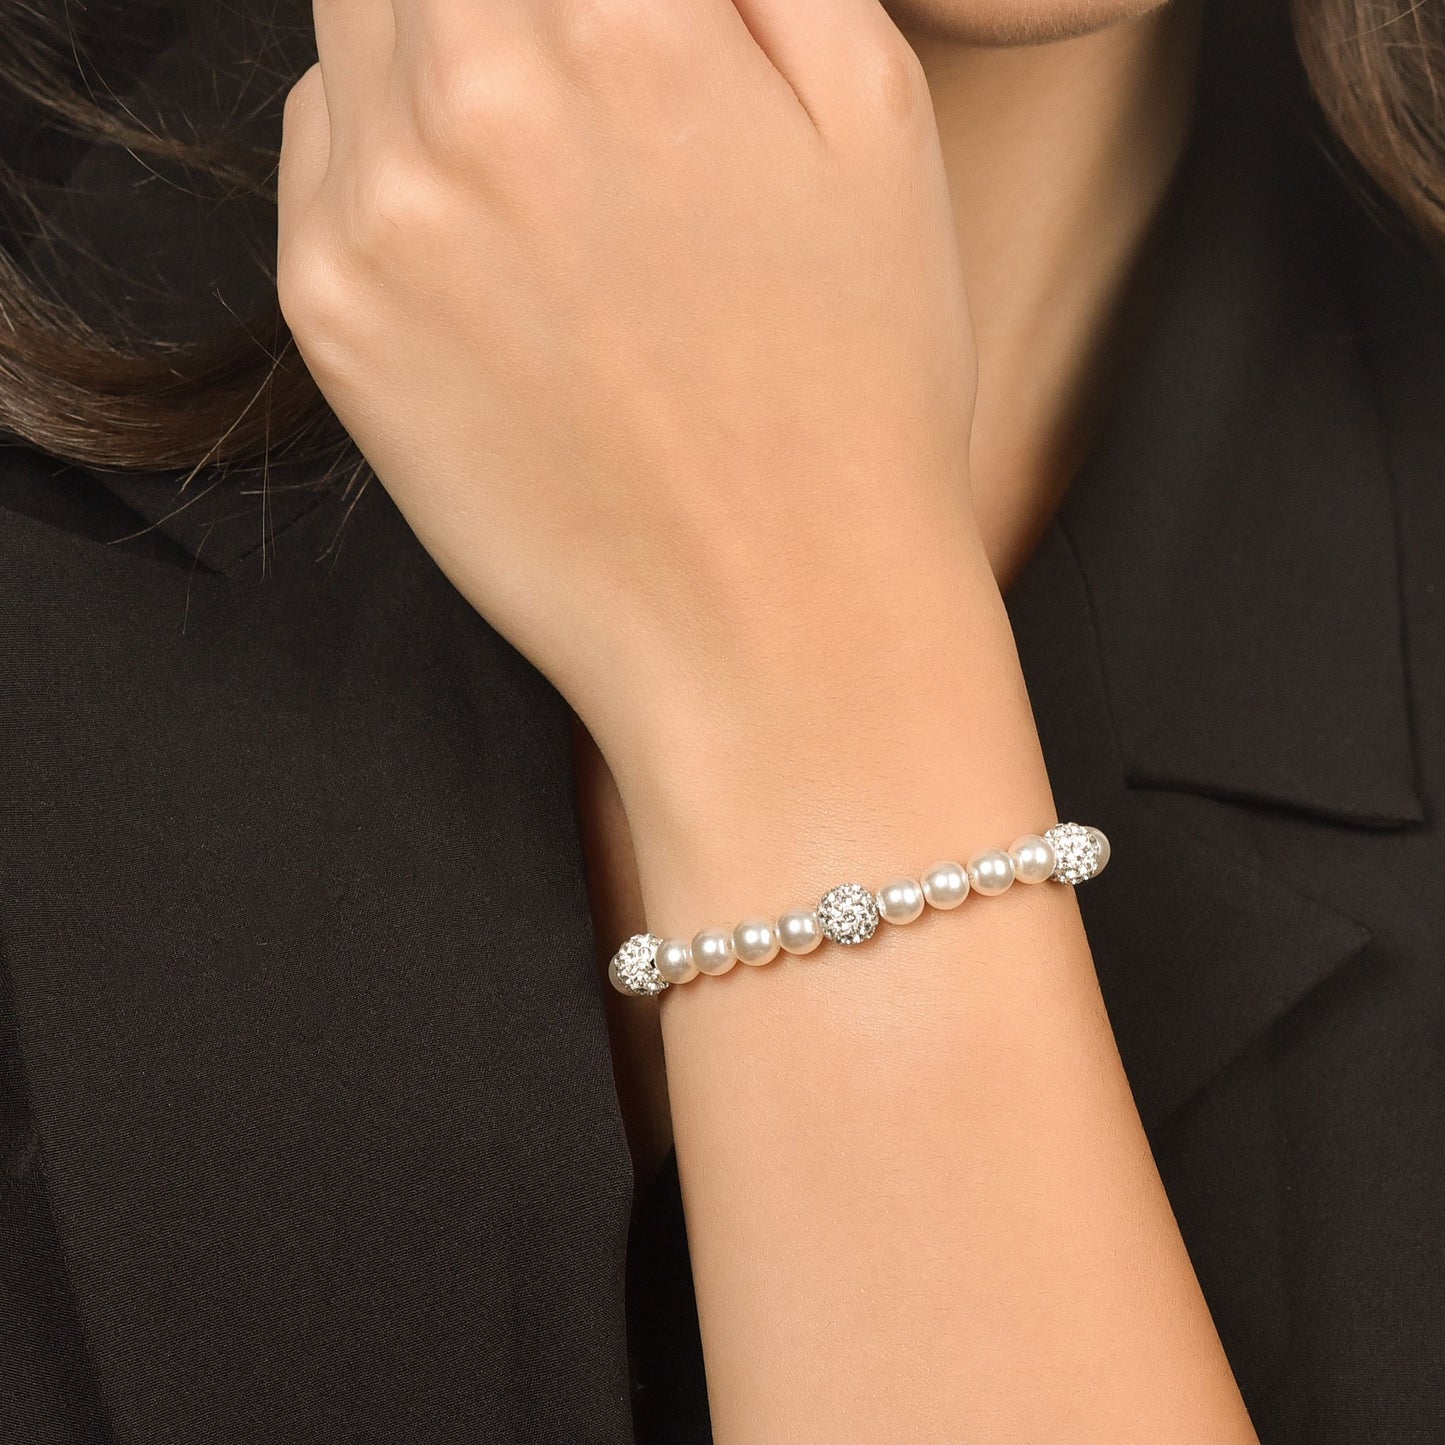 WOMAN'S PEARL BRACELET WITH WHITE CRYSTALS Luca Barra